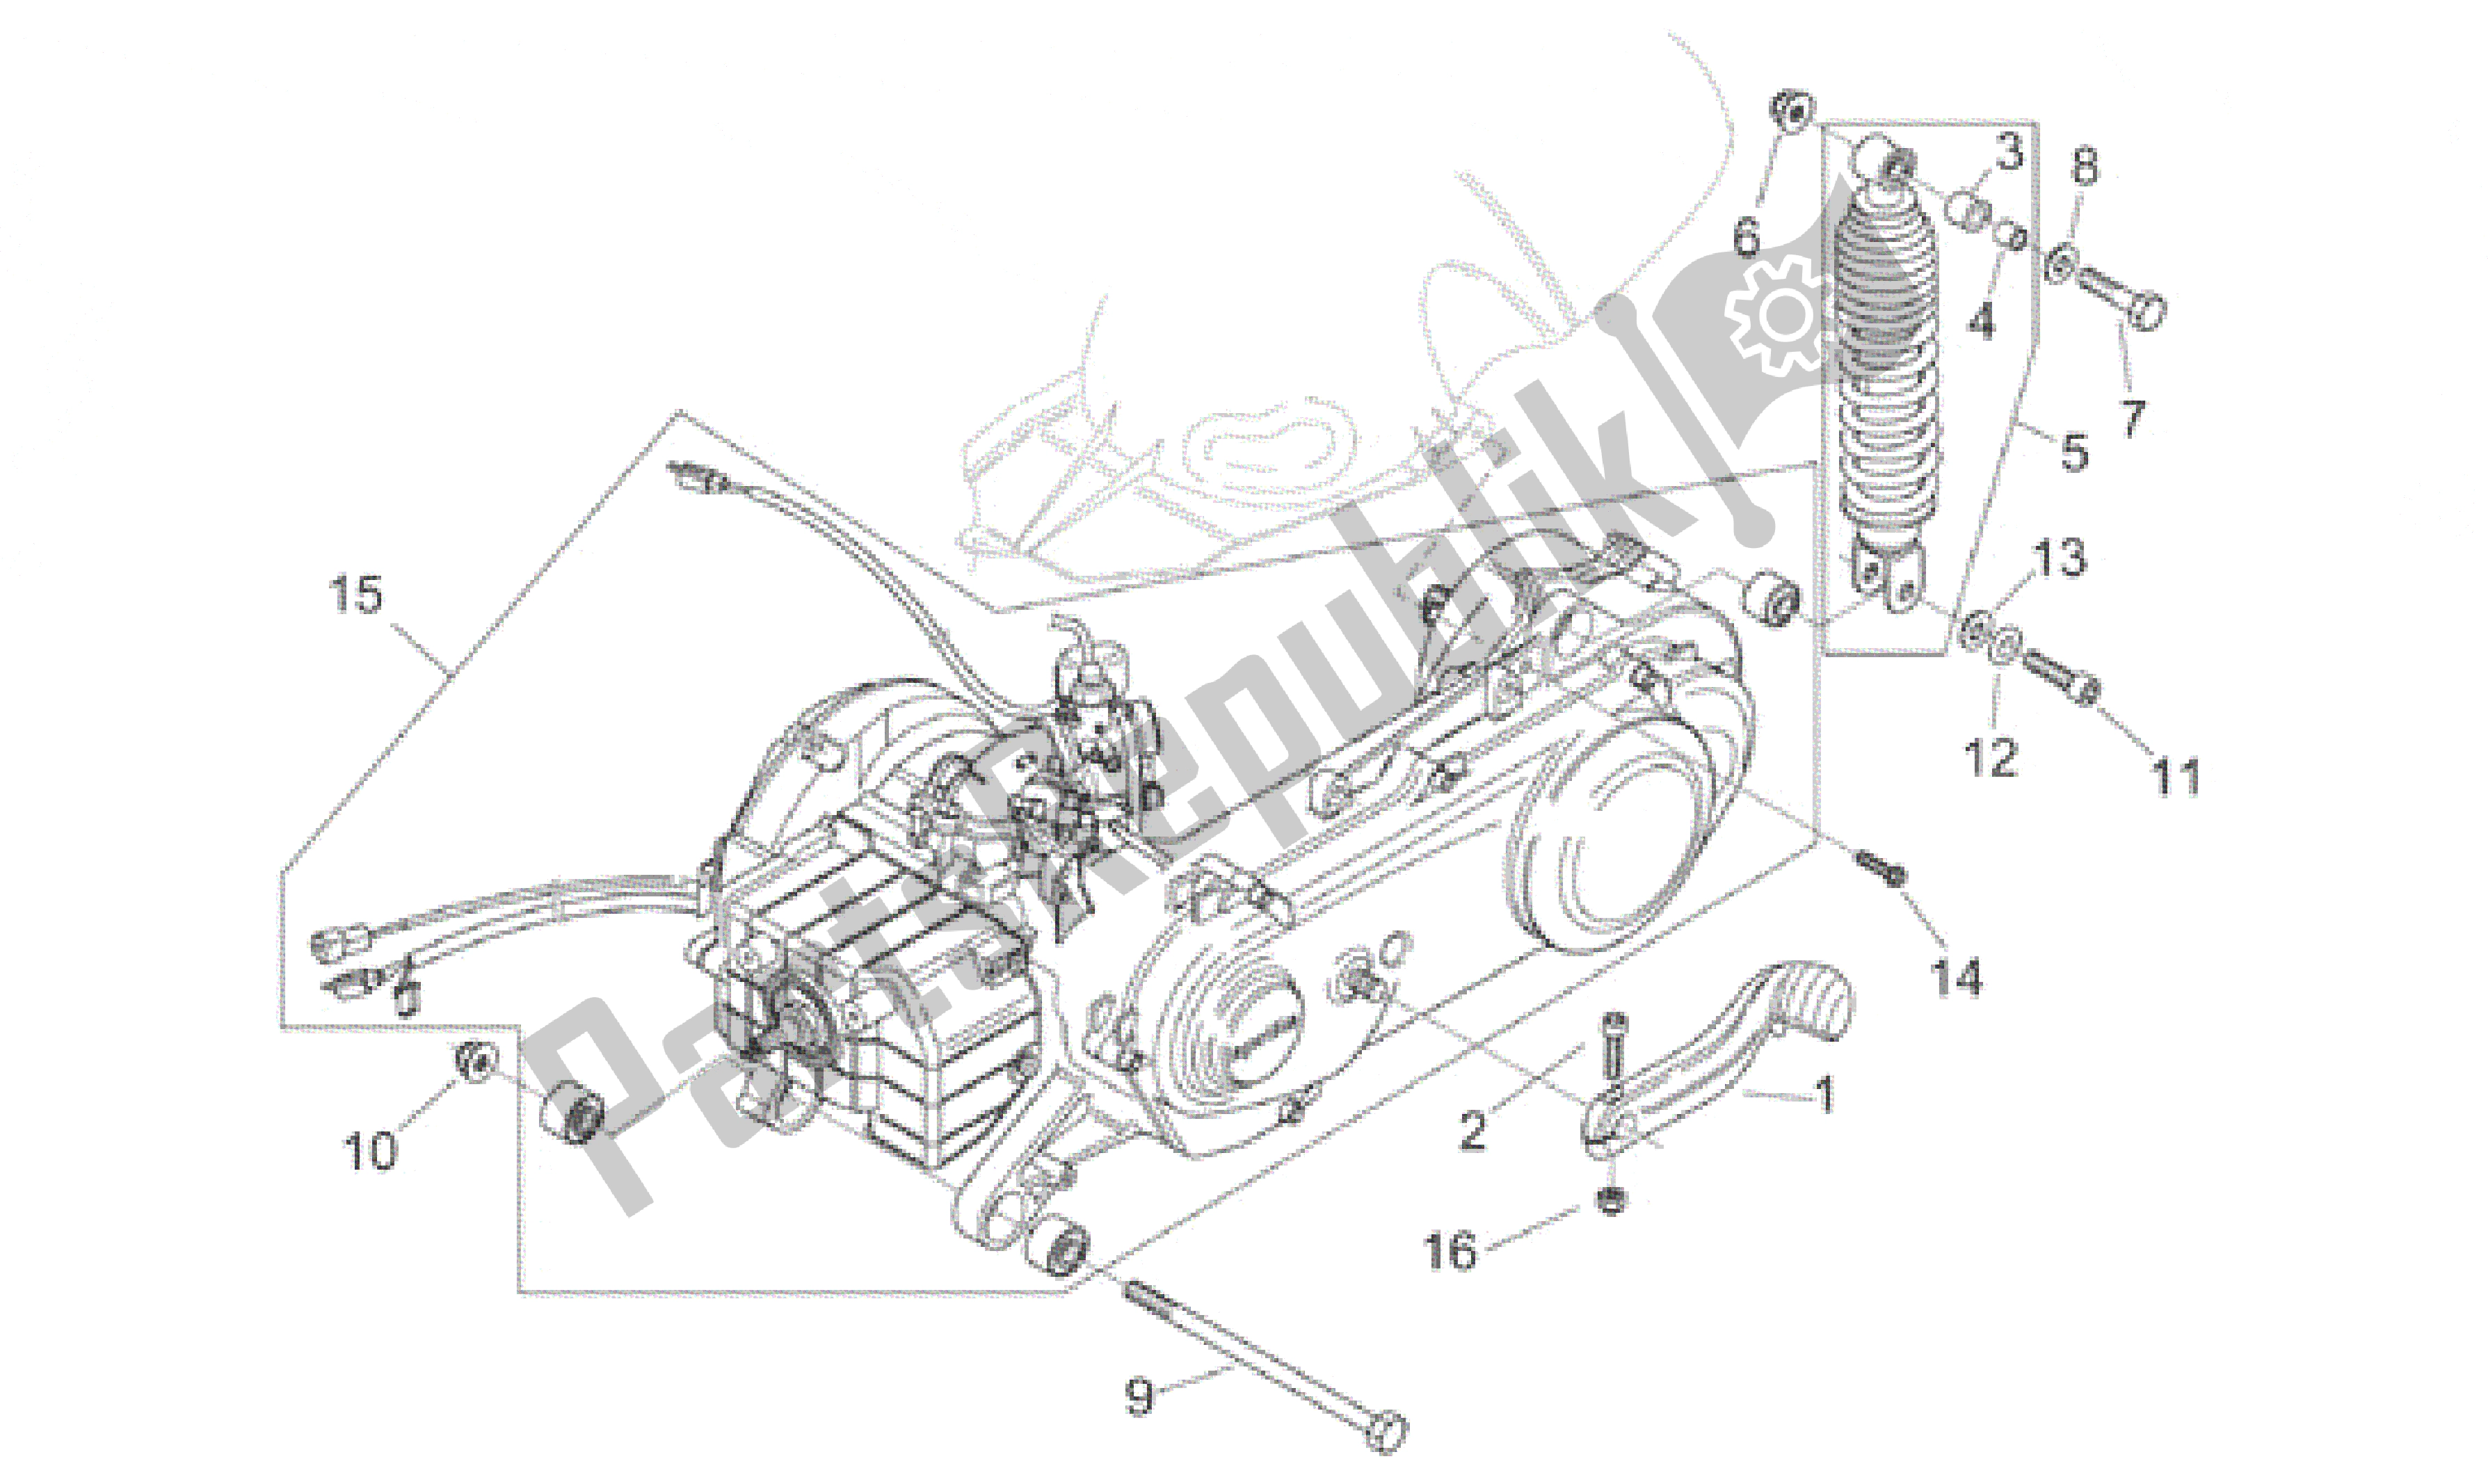 All parts for the Engine - Rear Shock Absorber of the Aprilia Mojito 50 1999 - 2000